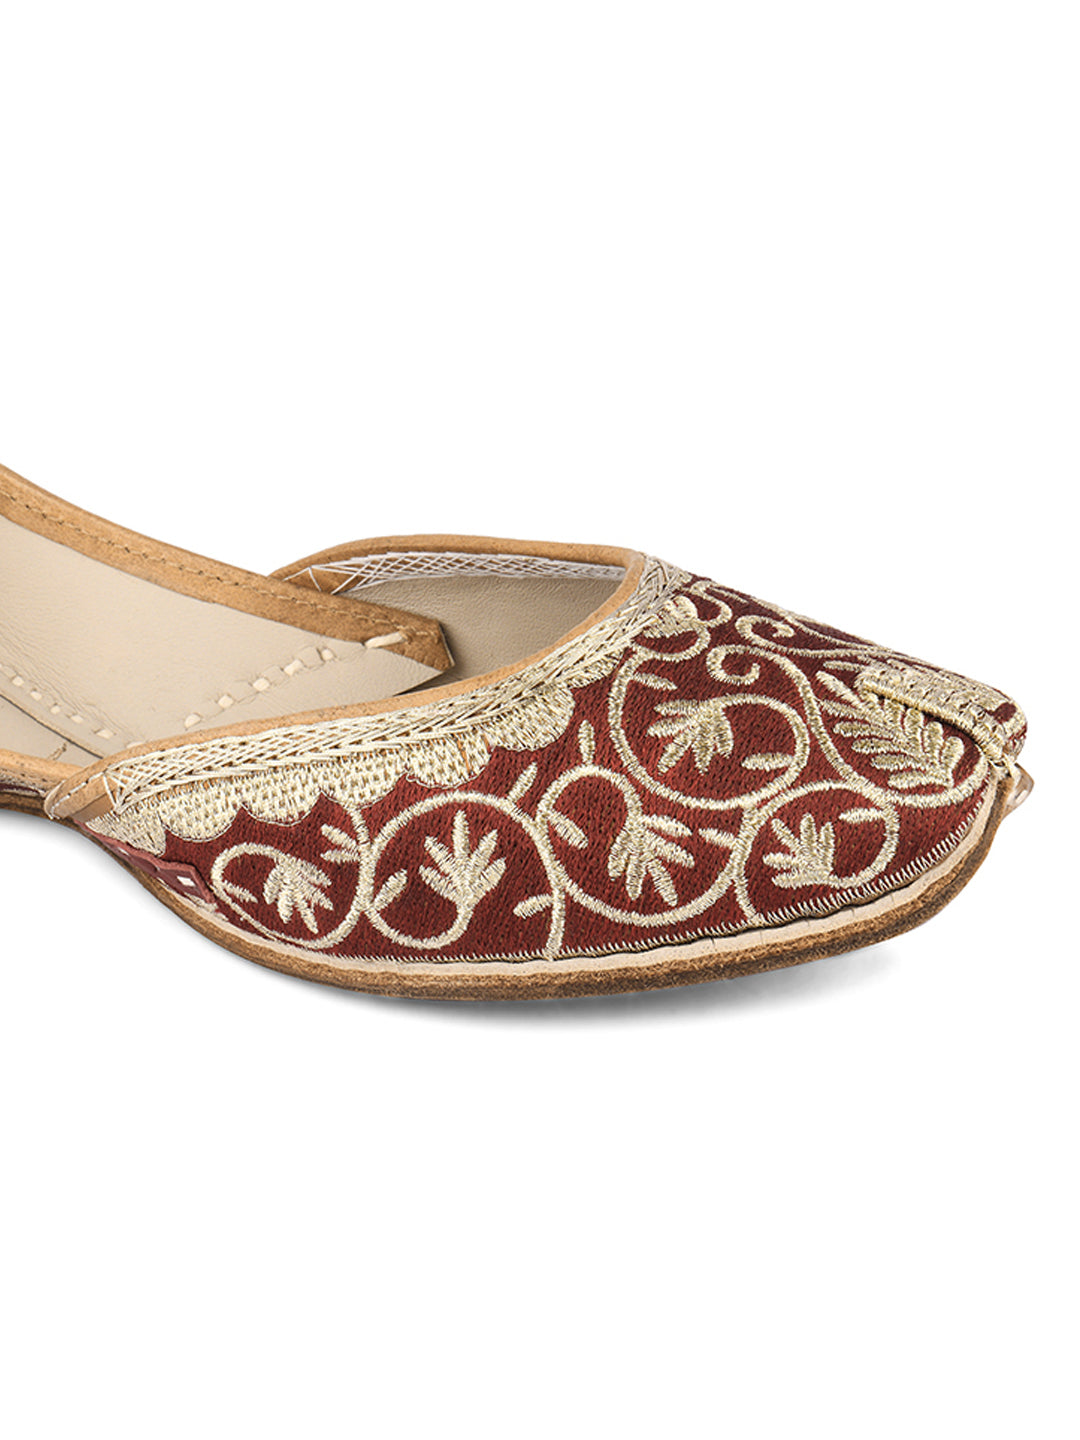 DESI COLOUR Women Maroon  Gold-Toned Hand Embroidered Mojaris